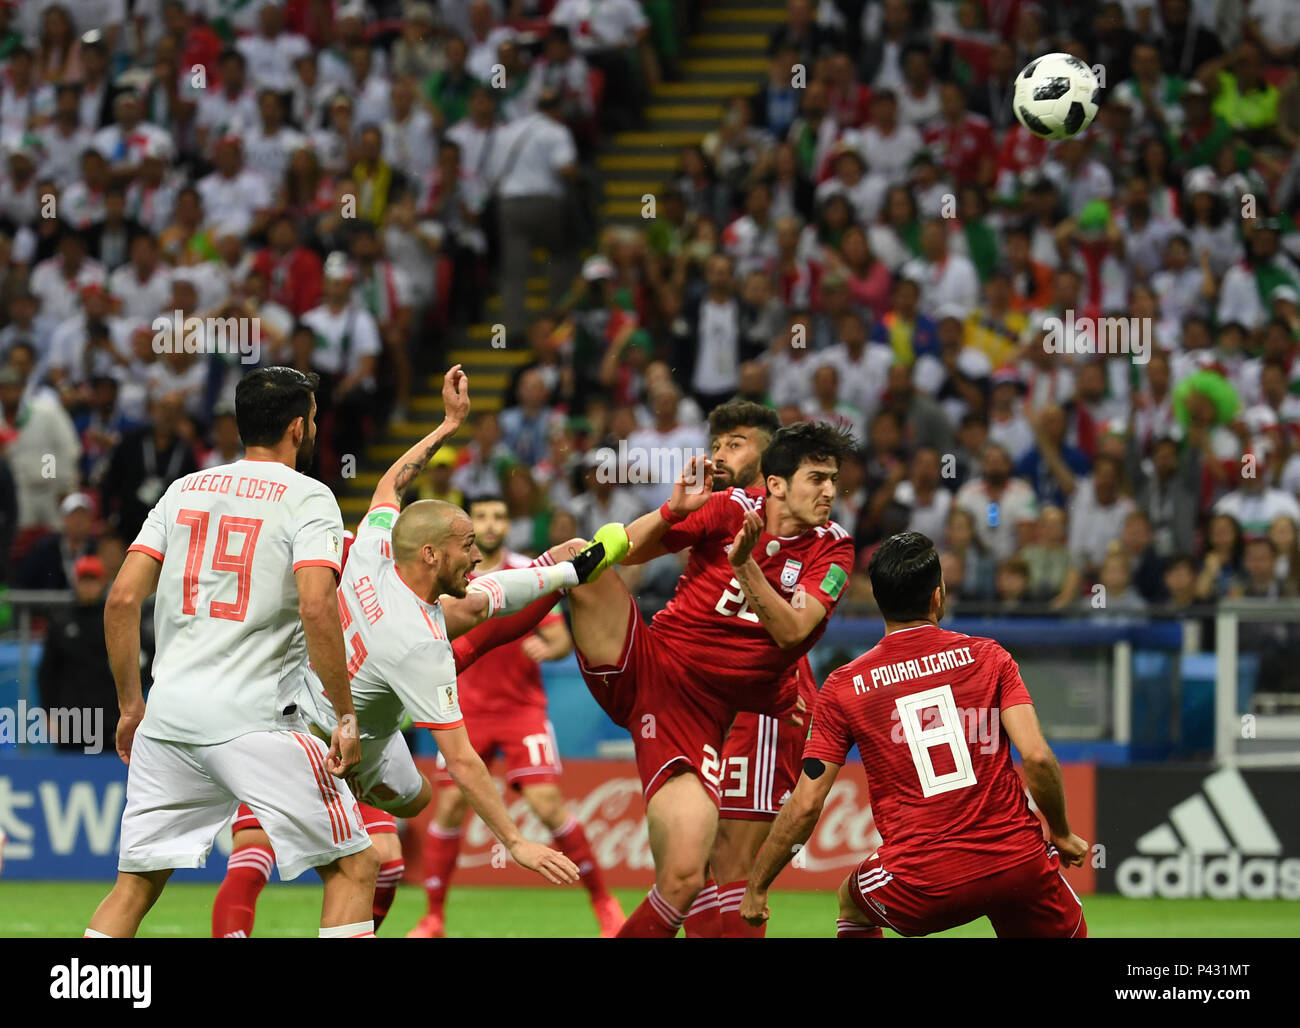 Kazan, Russia. 20th June, 2018. David Silva (2nd L) of Spain shoots during a Group B match between Spain and Iran at the 2018 FIFA World Cup in Kazan, Russia, June 20, 2018. Credit: Chen Cheng/Xinhua/Alamy Live News Stock Photo